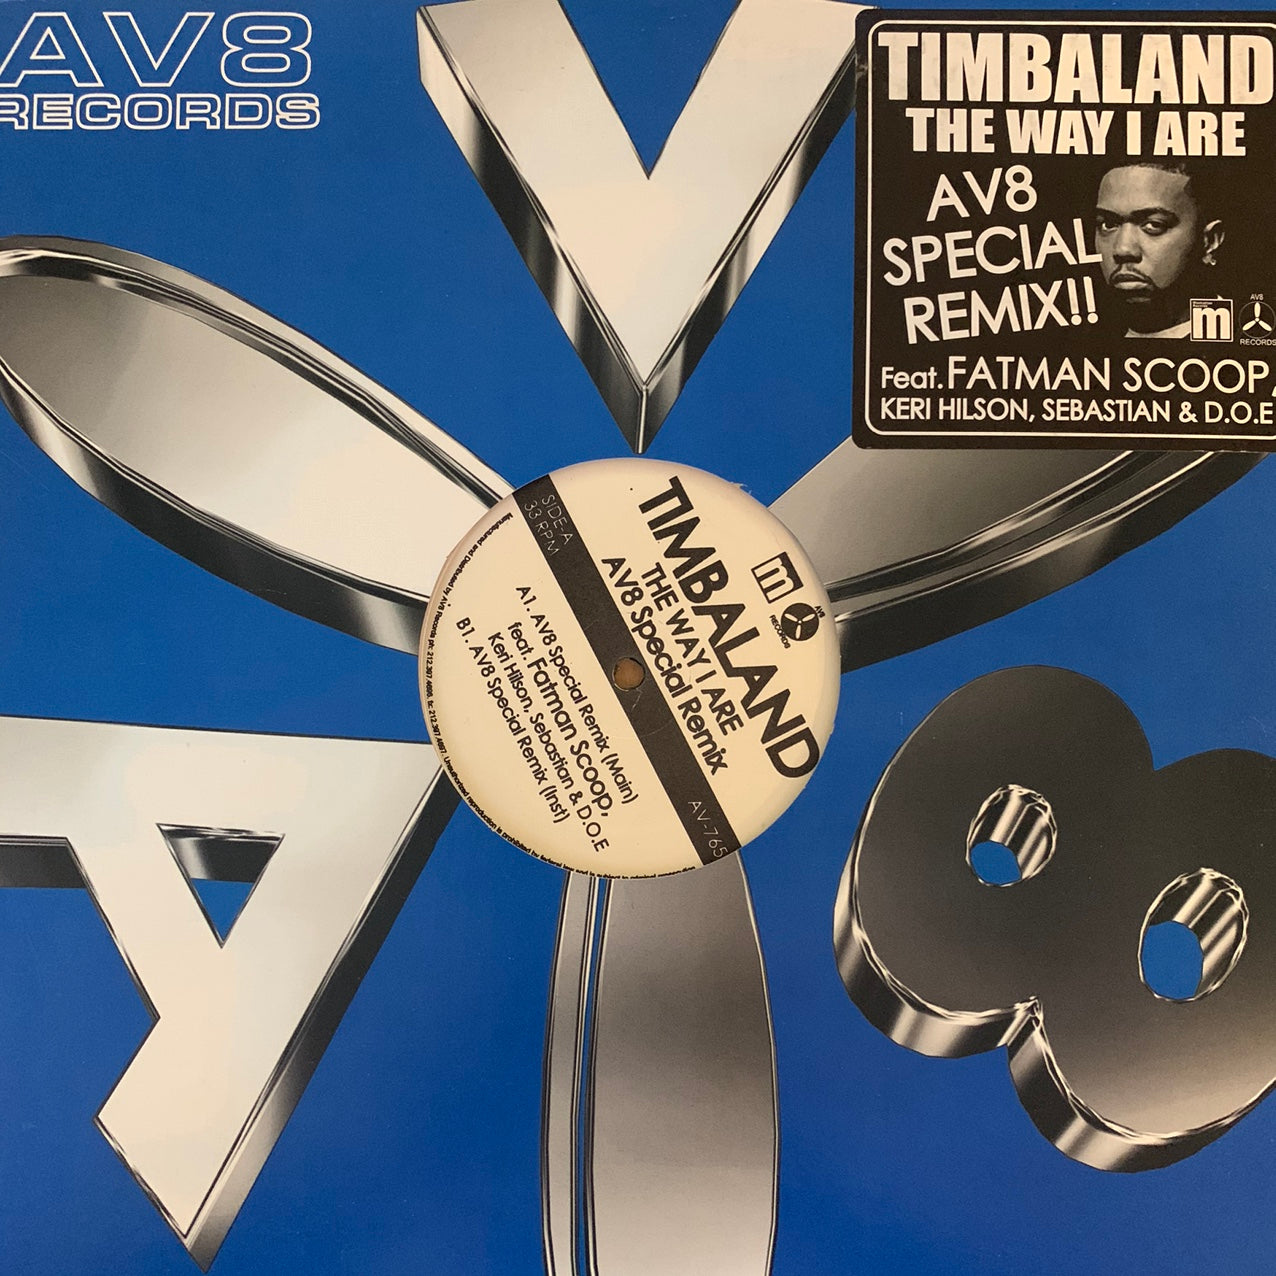 Timbaland “The Way Are I” AV8 Special Remix 3 Version 12inch Vinyl